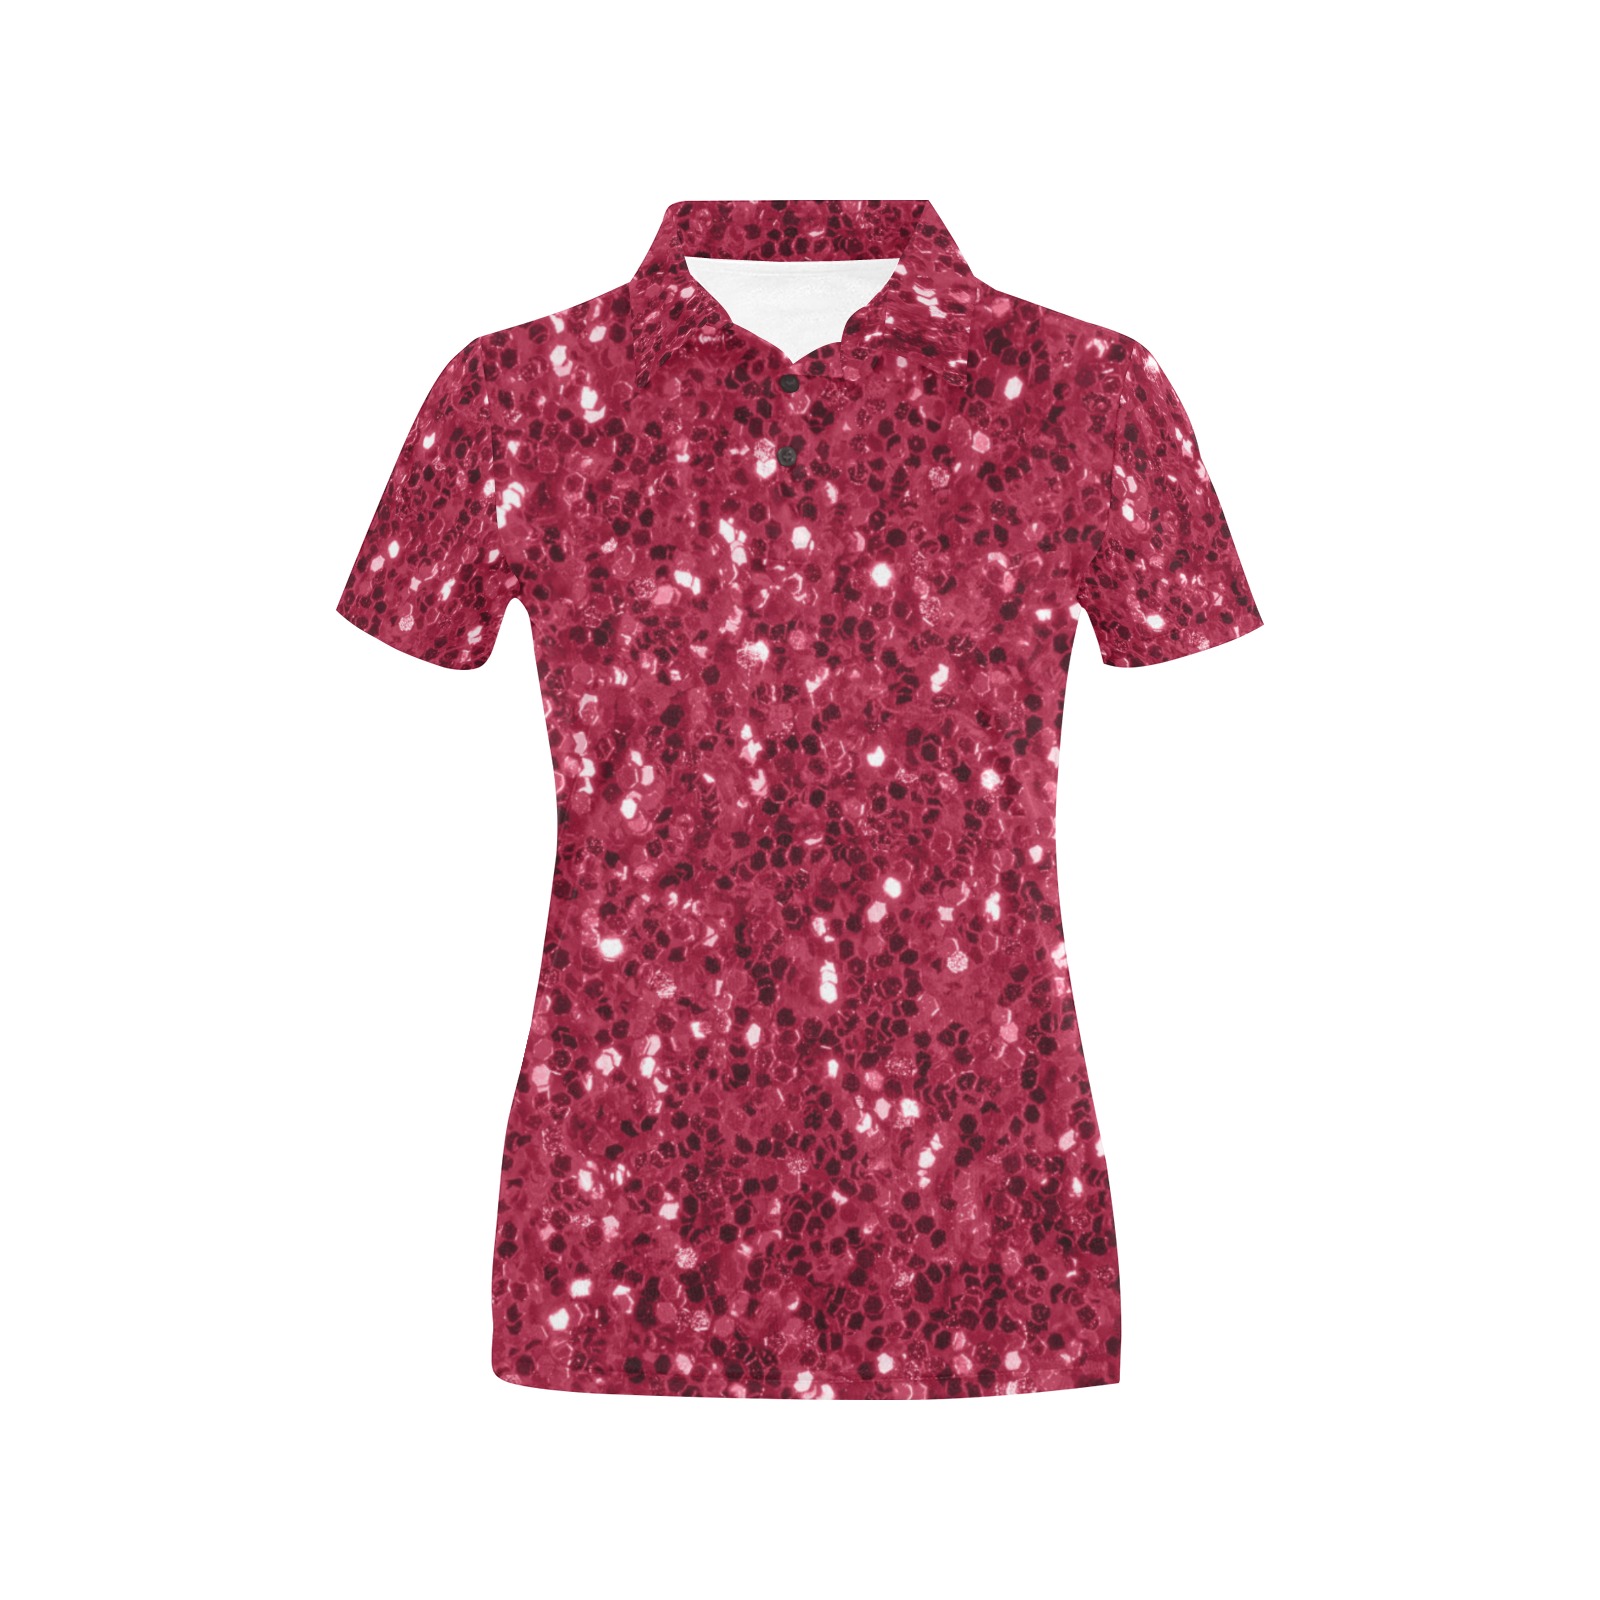 Magenta dark pink red faux sparkles glitter Women's All Over Print Polo Shirt (Model T55)